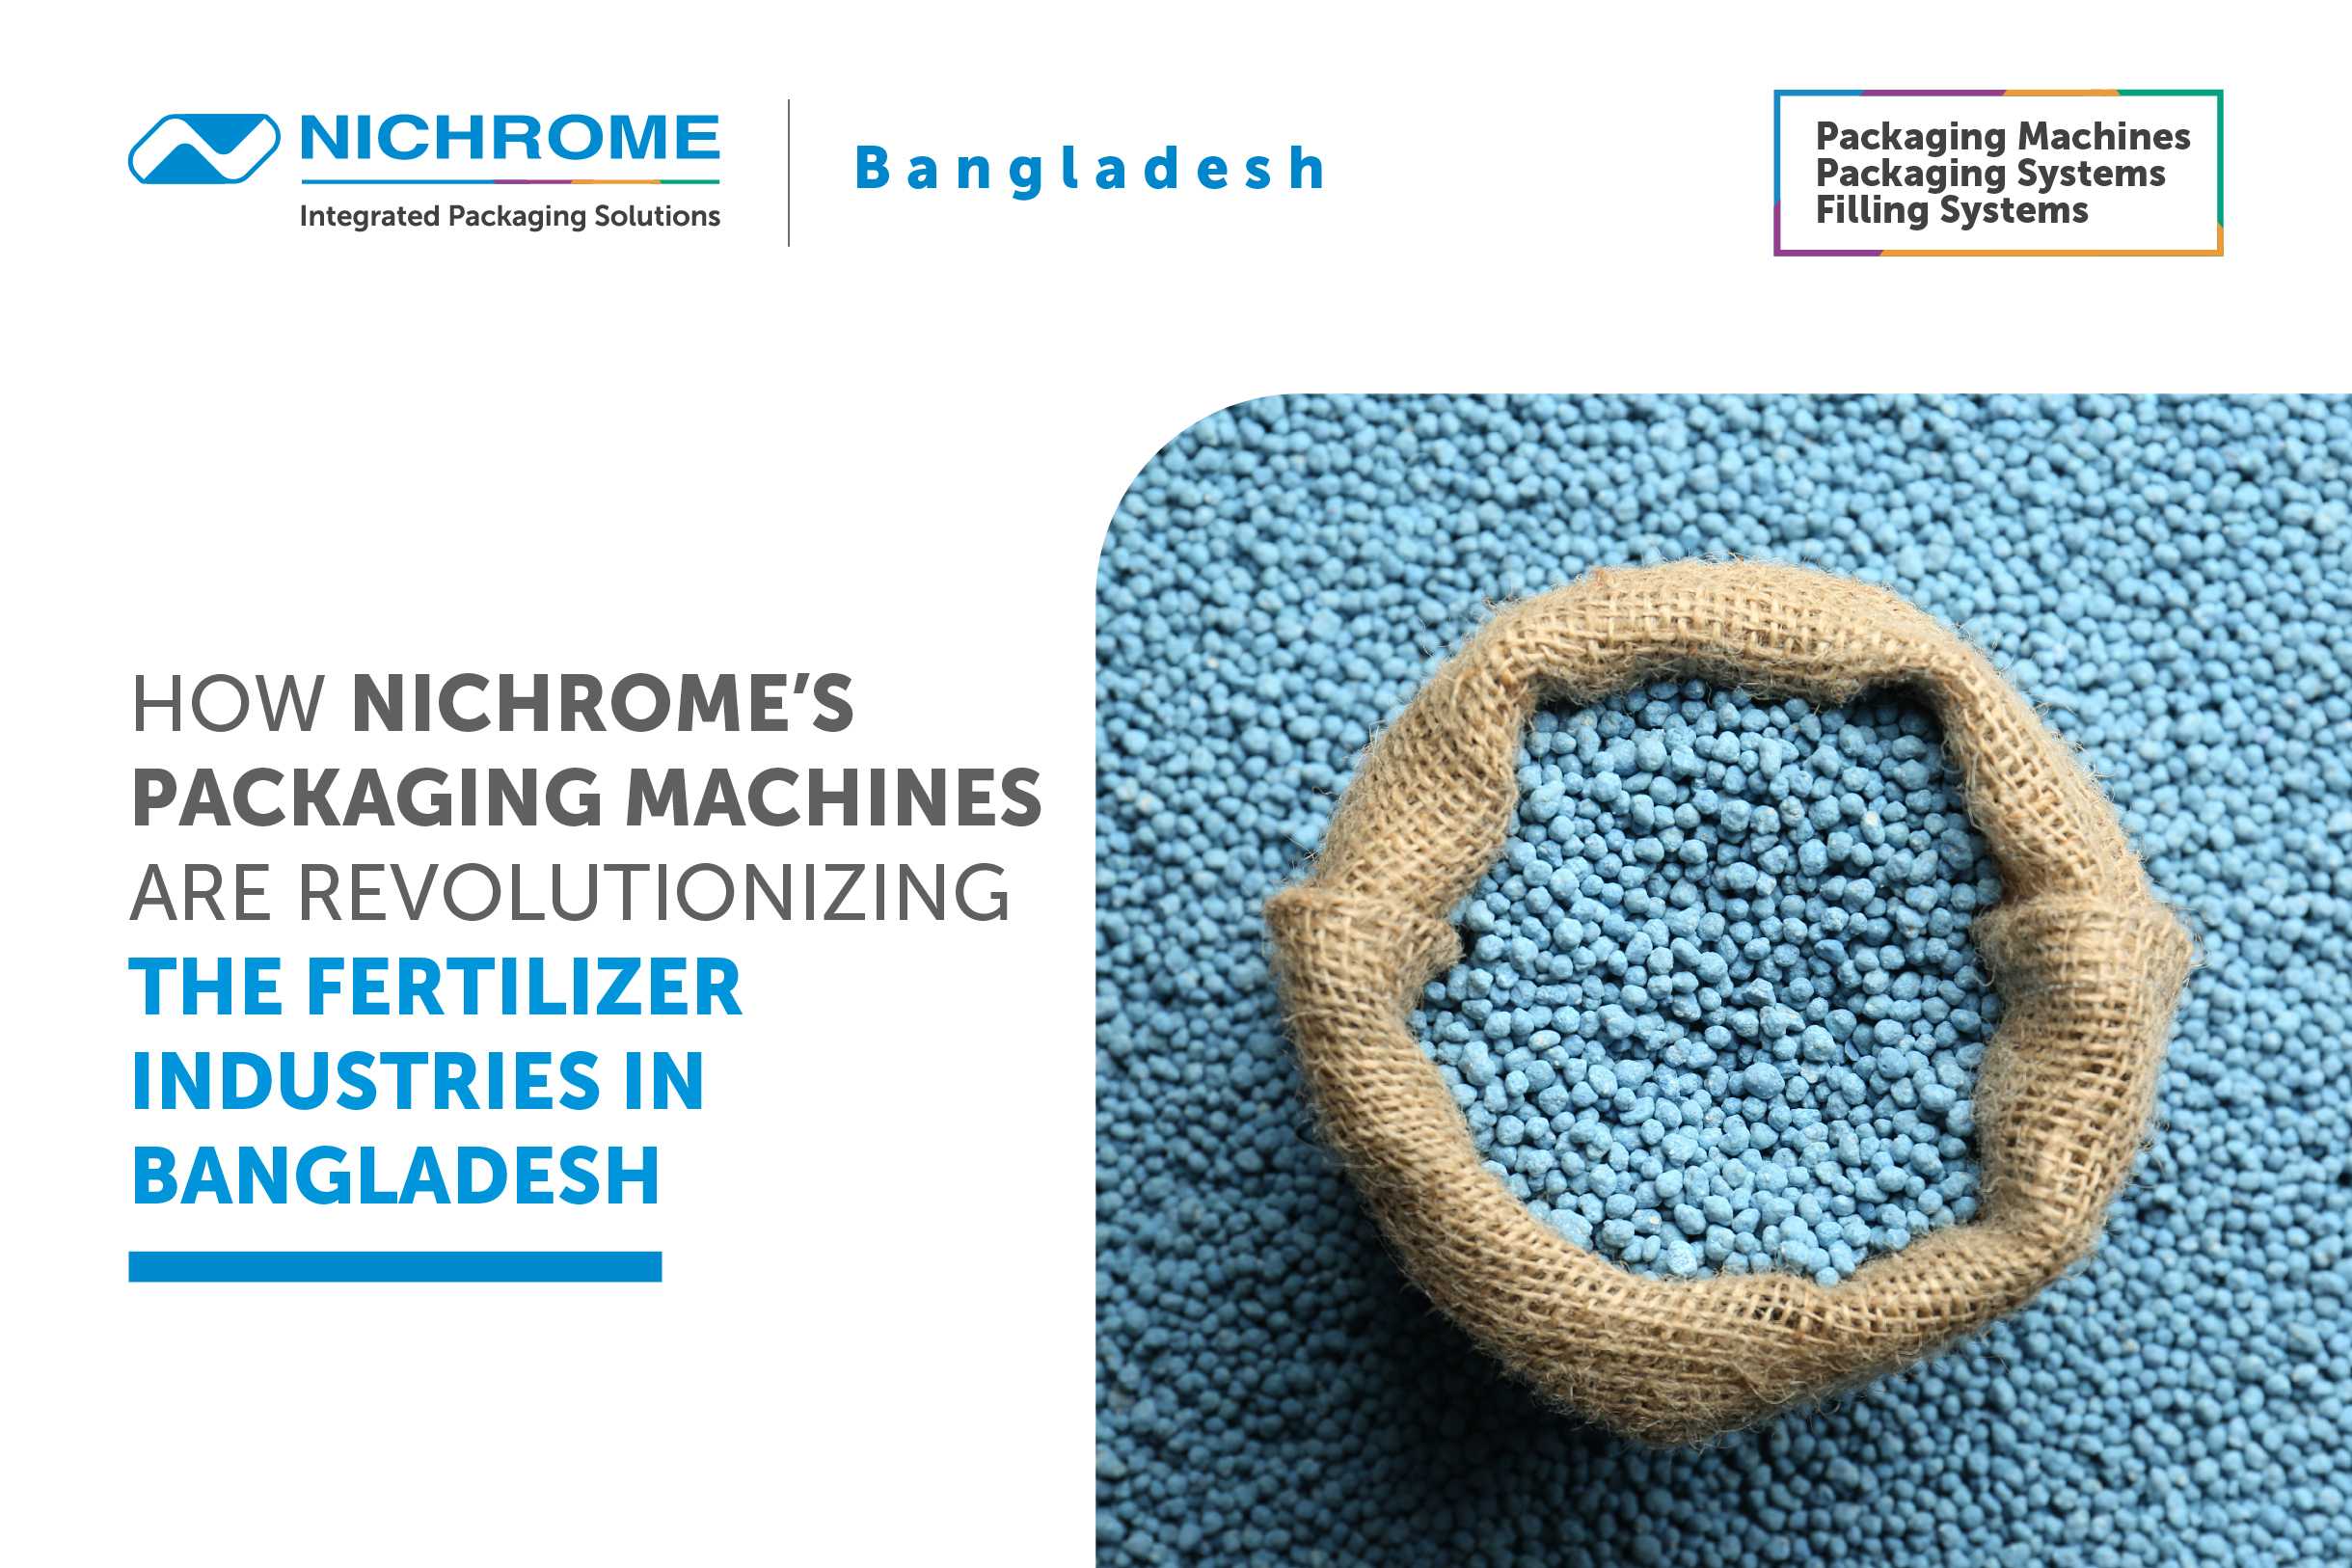 How Nichrome’s Packaging Machines Are Revolutionizing The Fertilizer Industries In Bangladesh